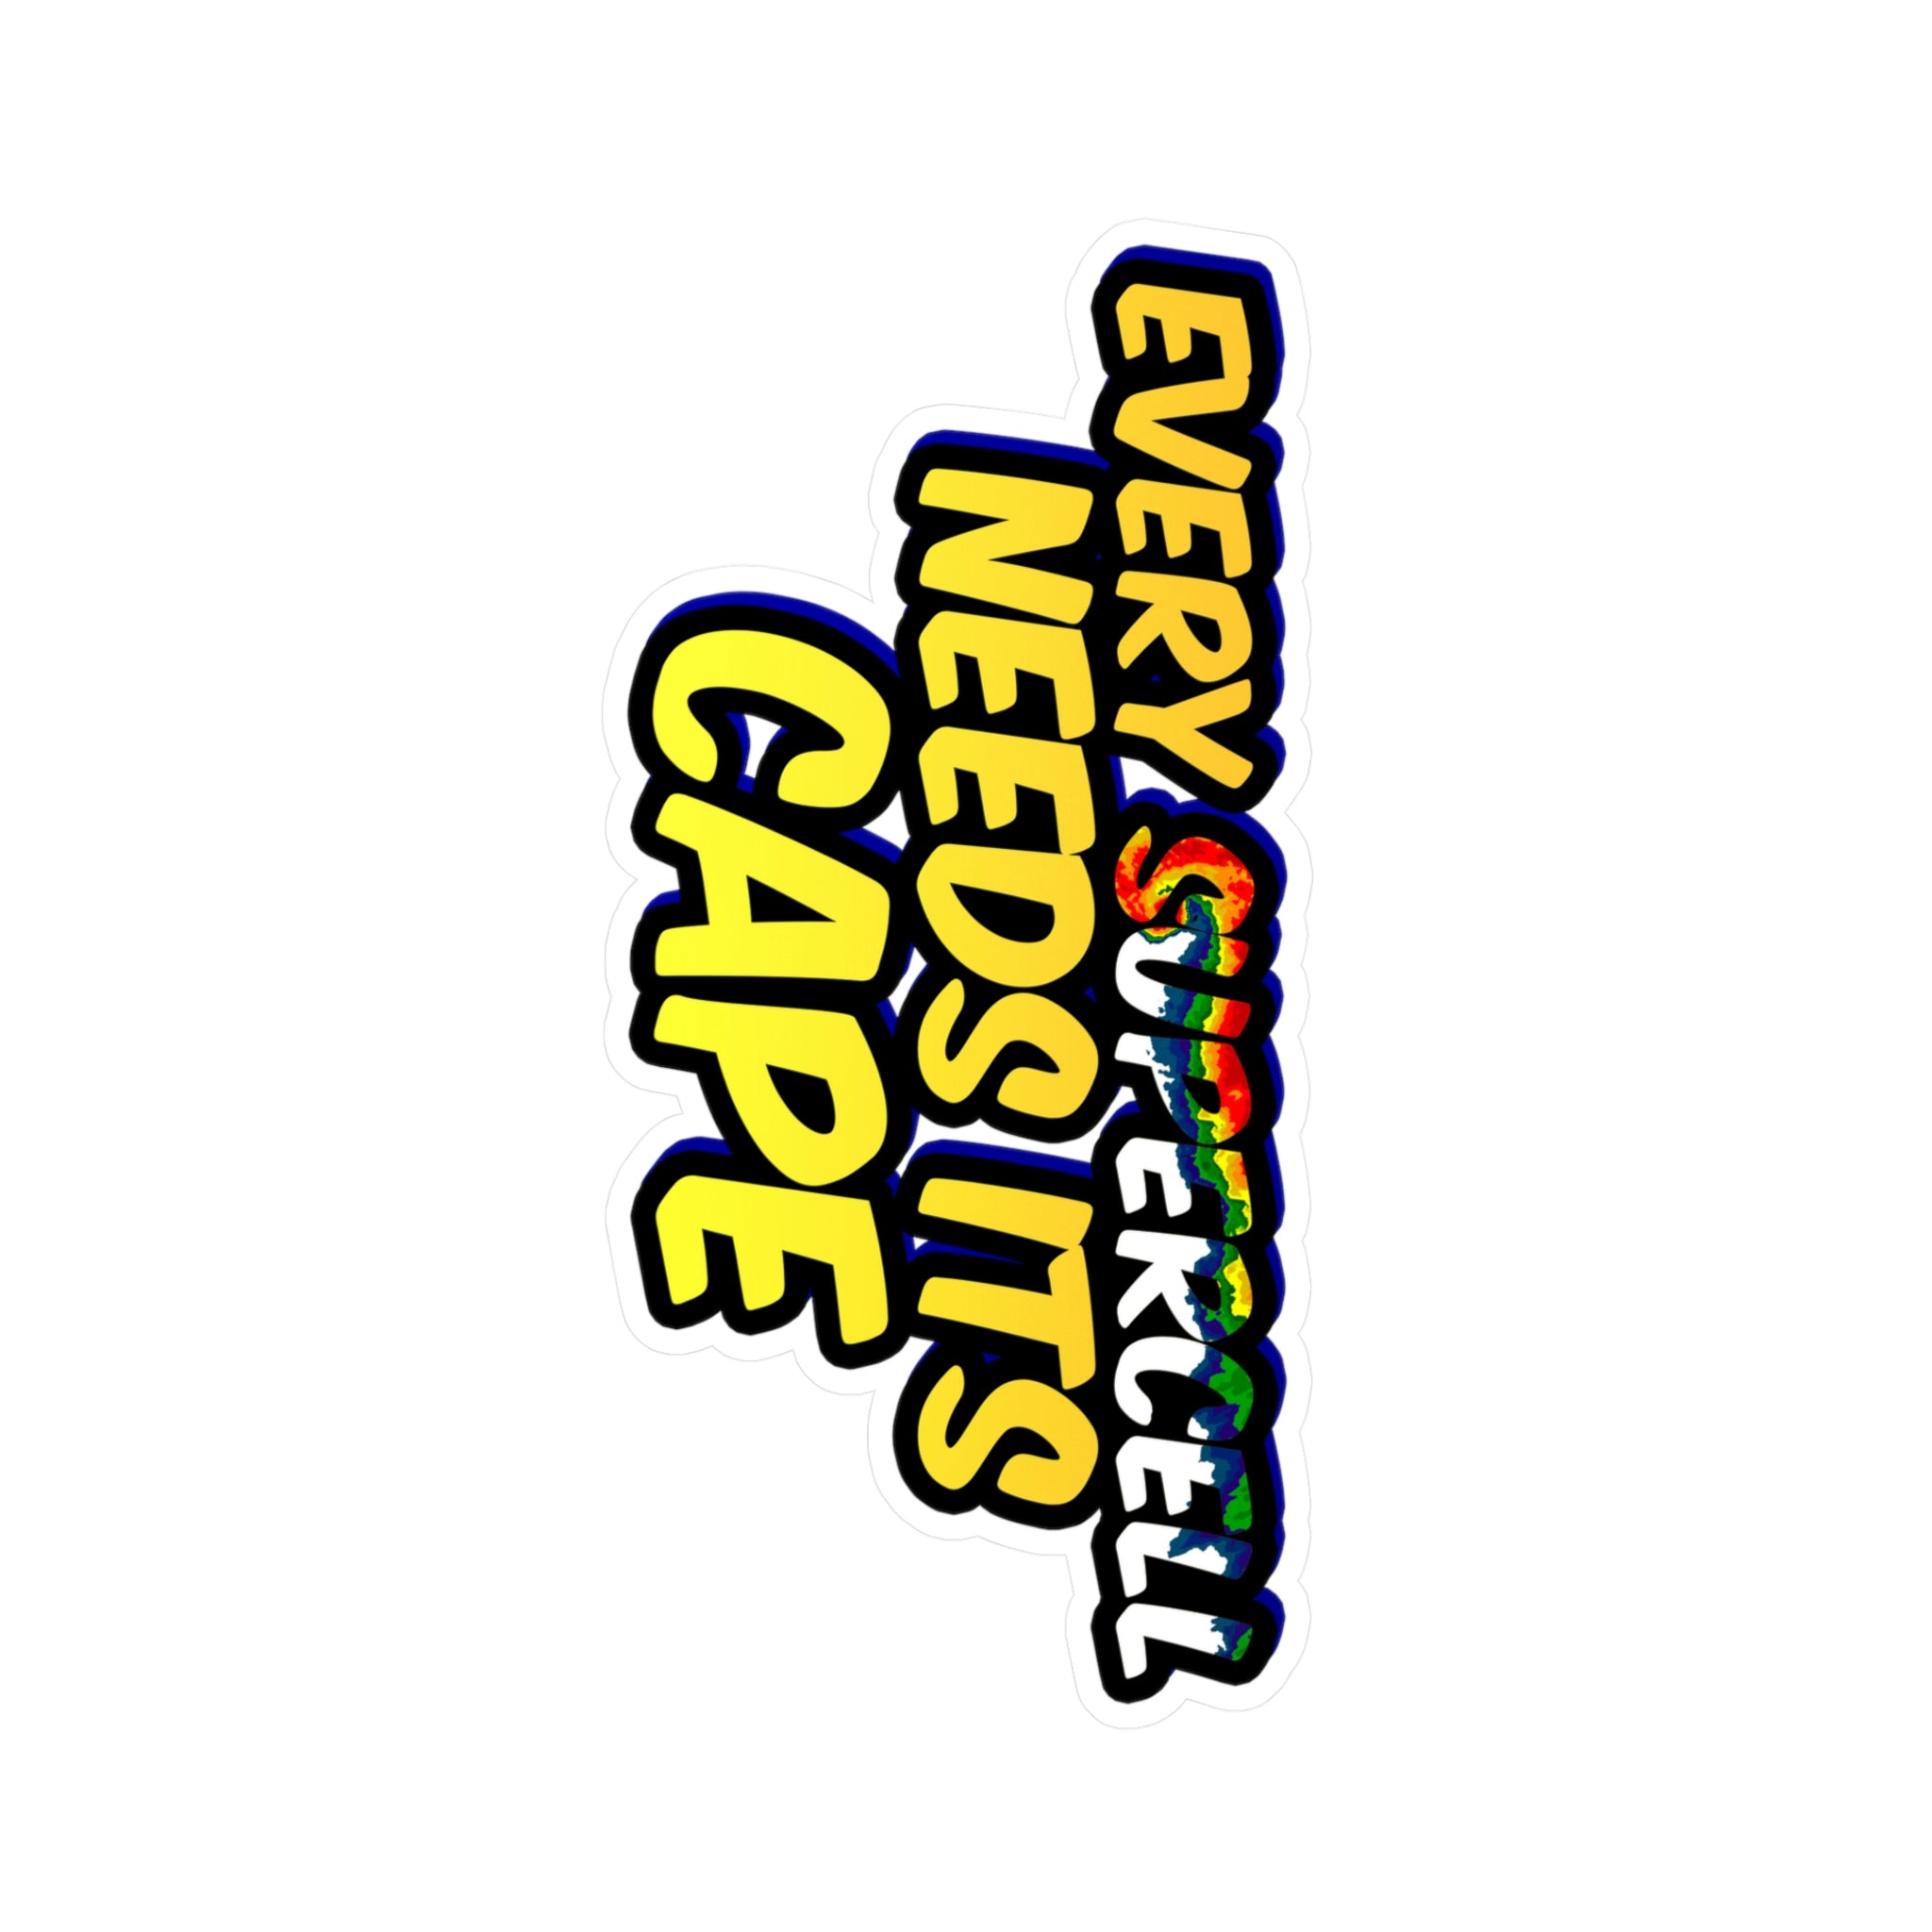 Every Supercell Needs Its CAPE Vinyl Decal 